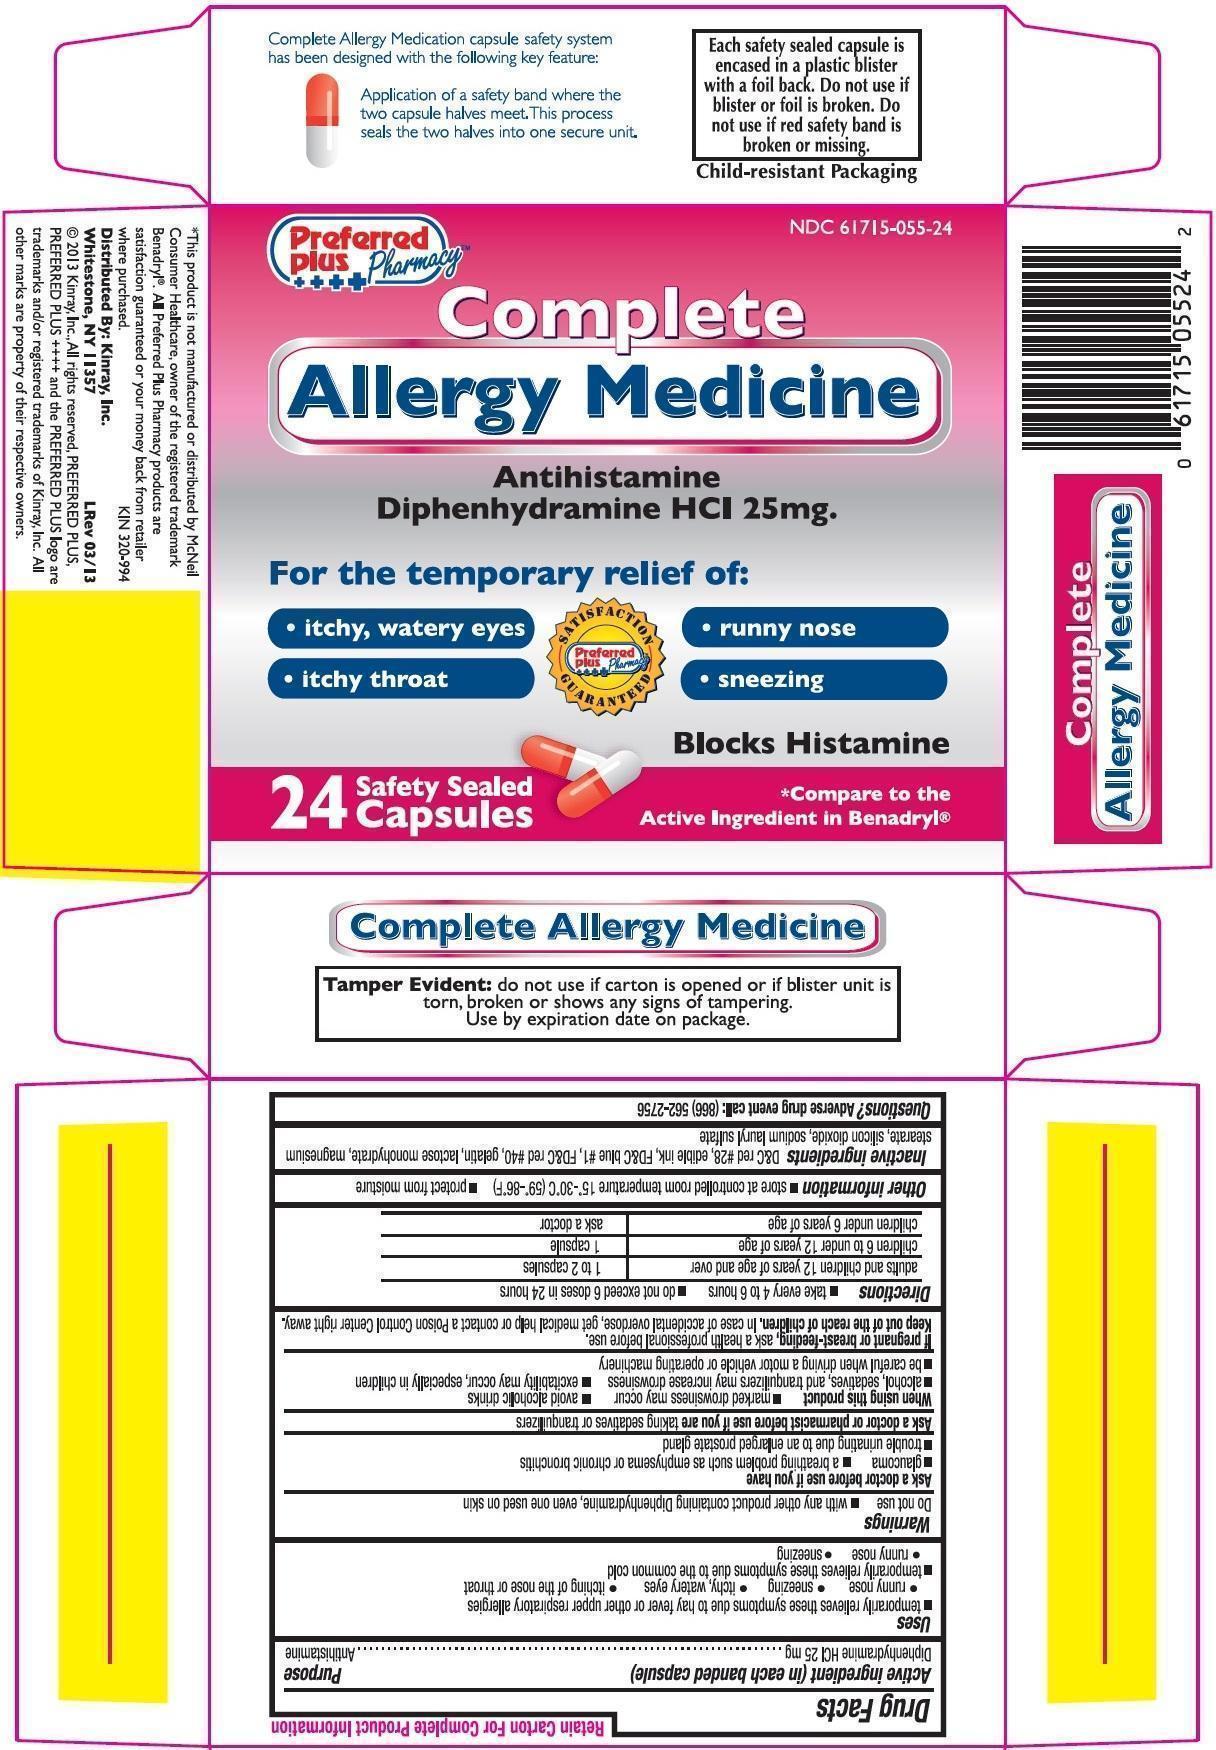 Preferred Plus Complete Allergy Releif product label